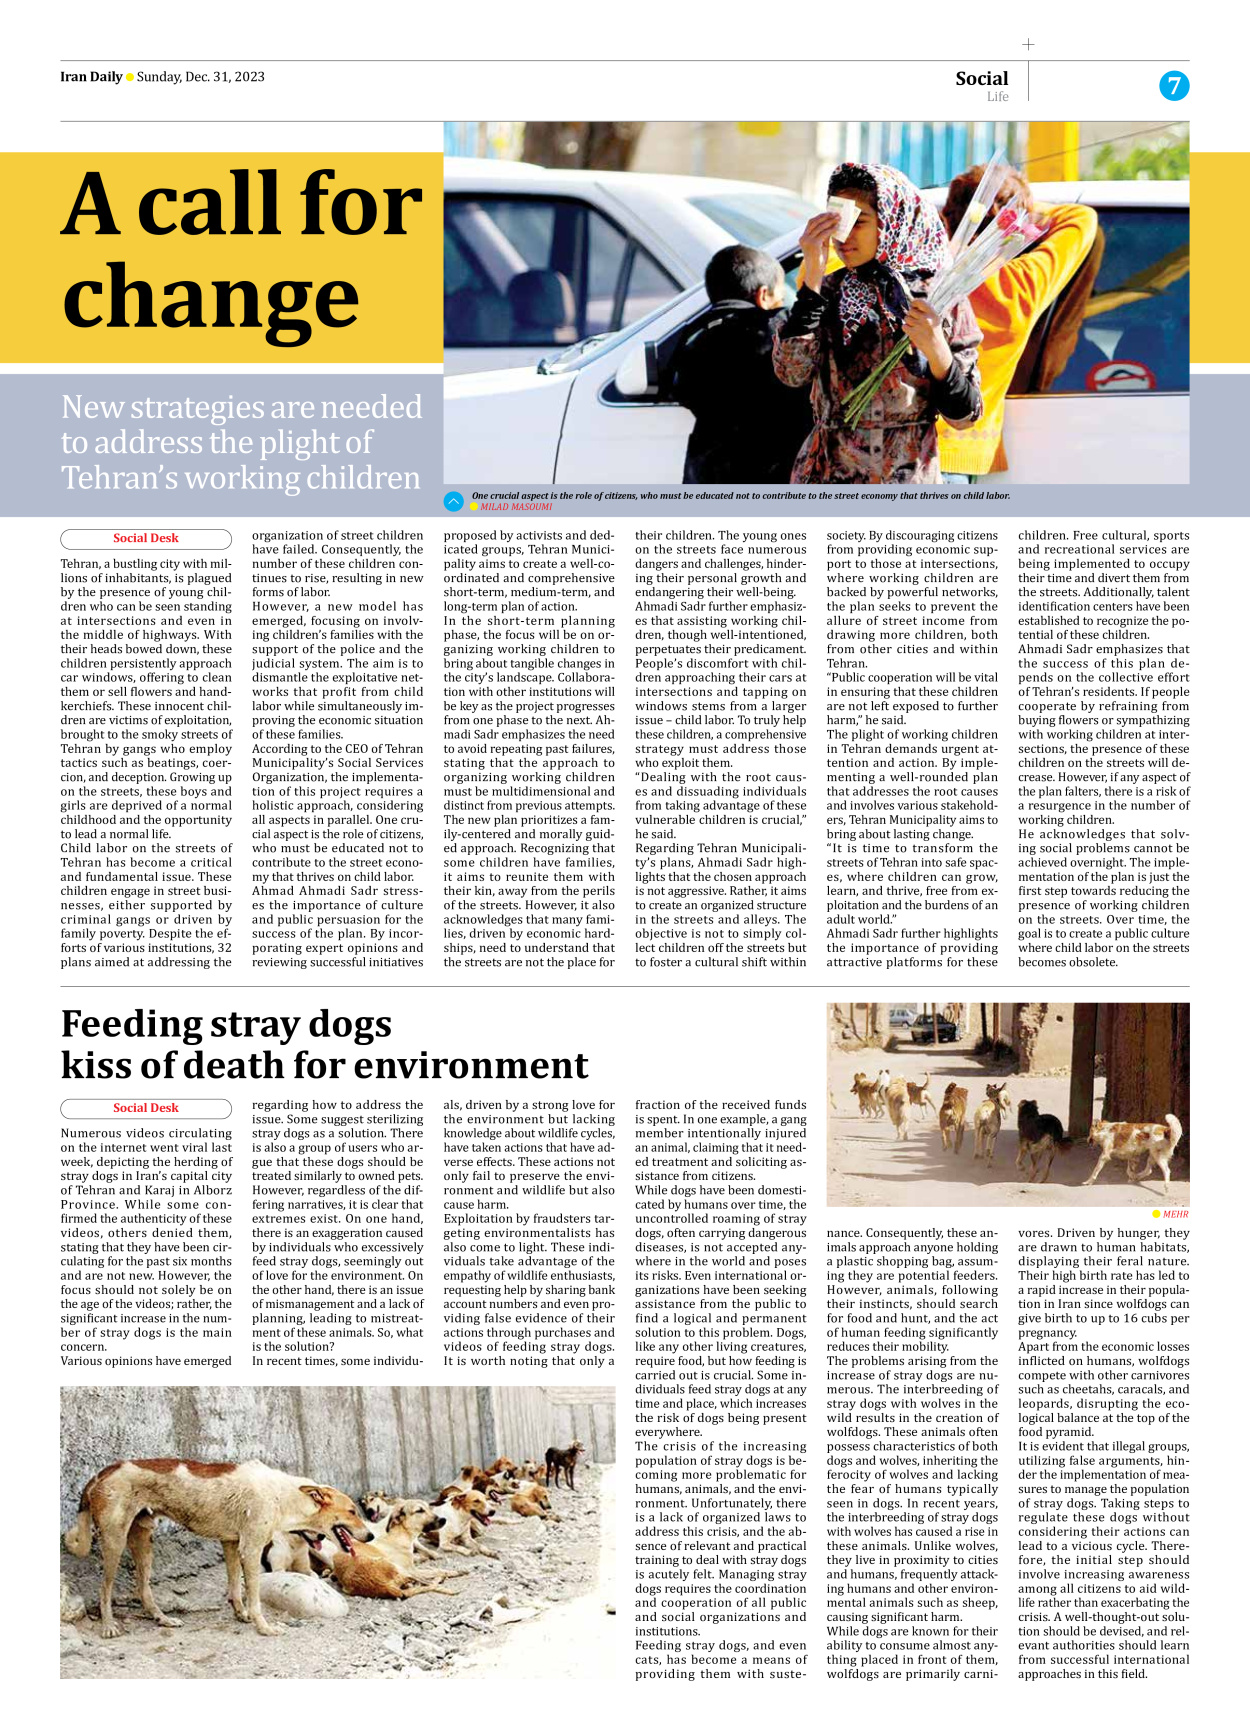 Iran Daily - Number Seven Thousand Four Hundred and Seventy Two - 31 December 2023 - Page 7